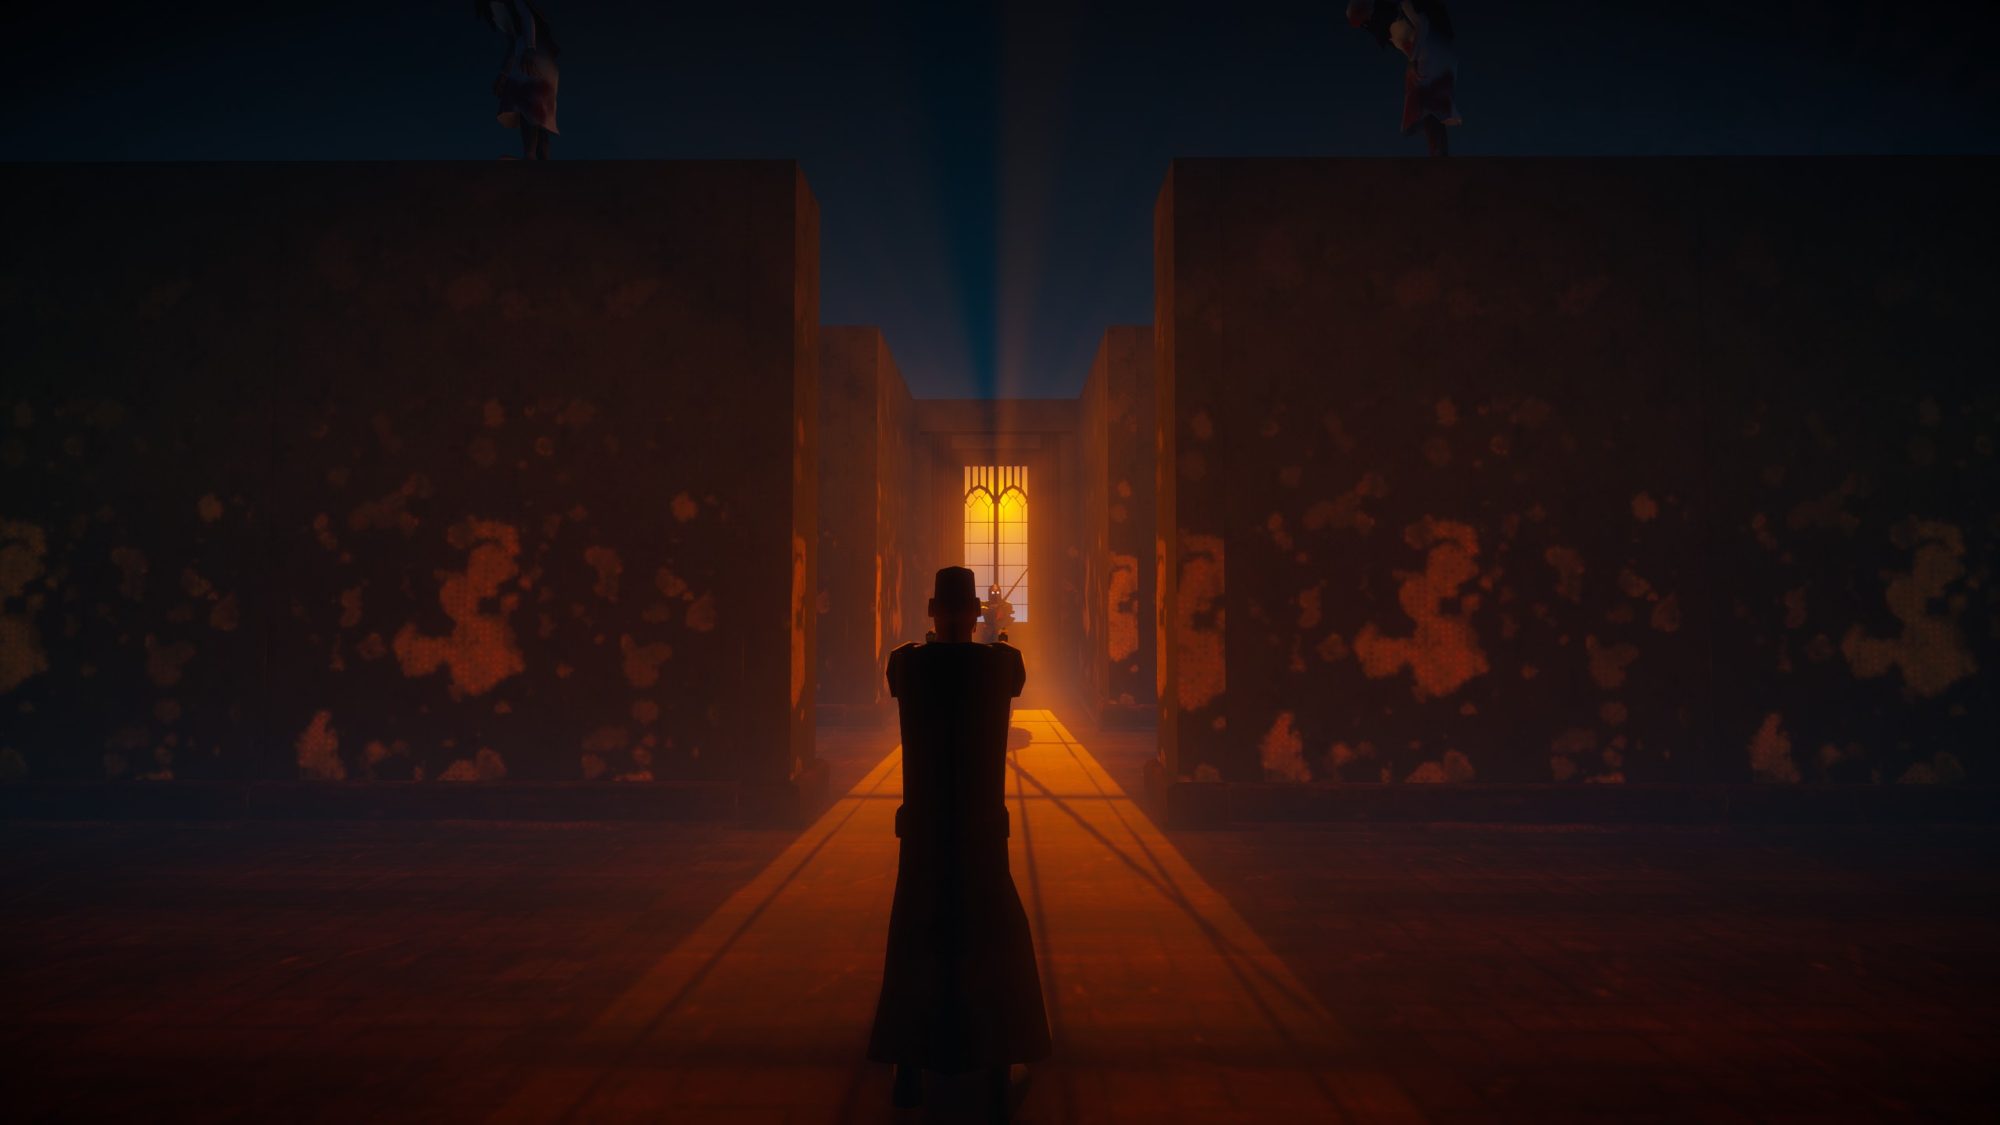 Hades II Is Sliding Into Early Access Sooner Than You Think